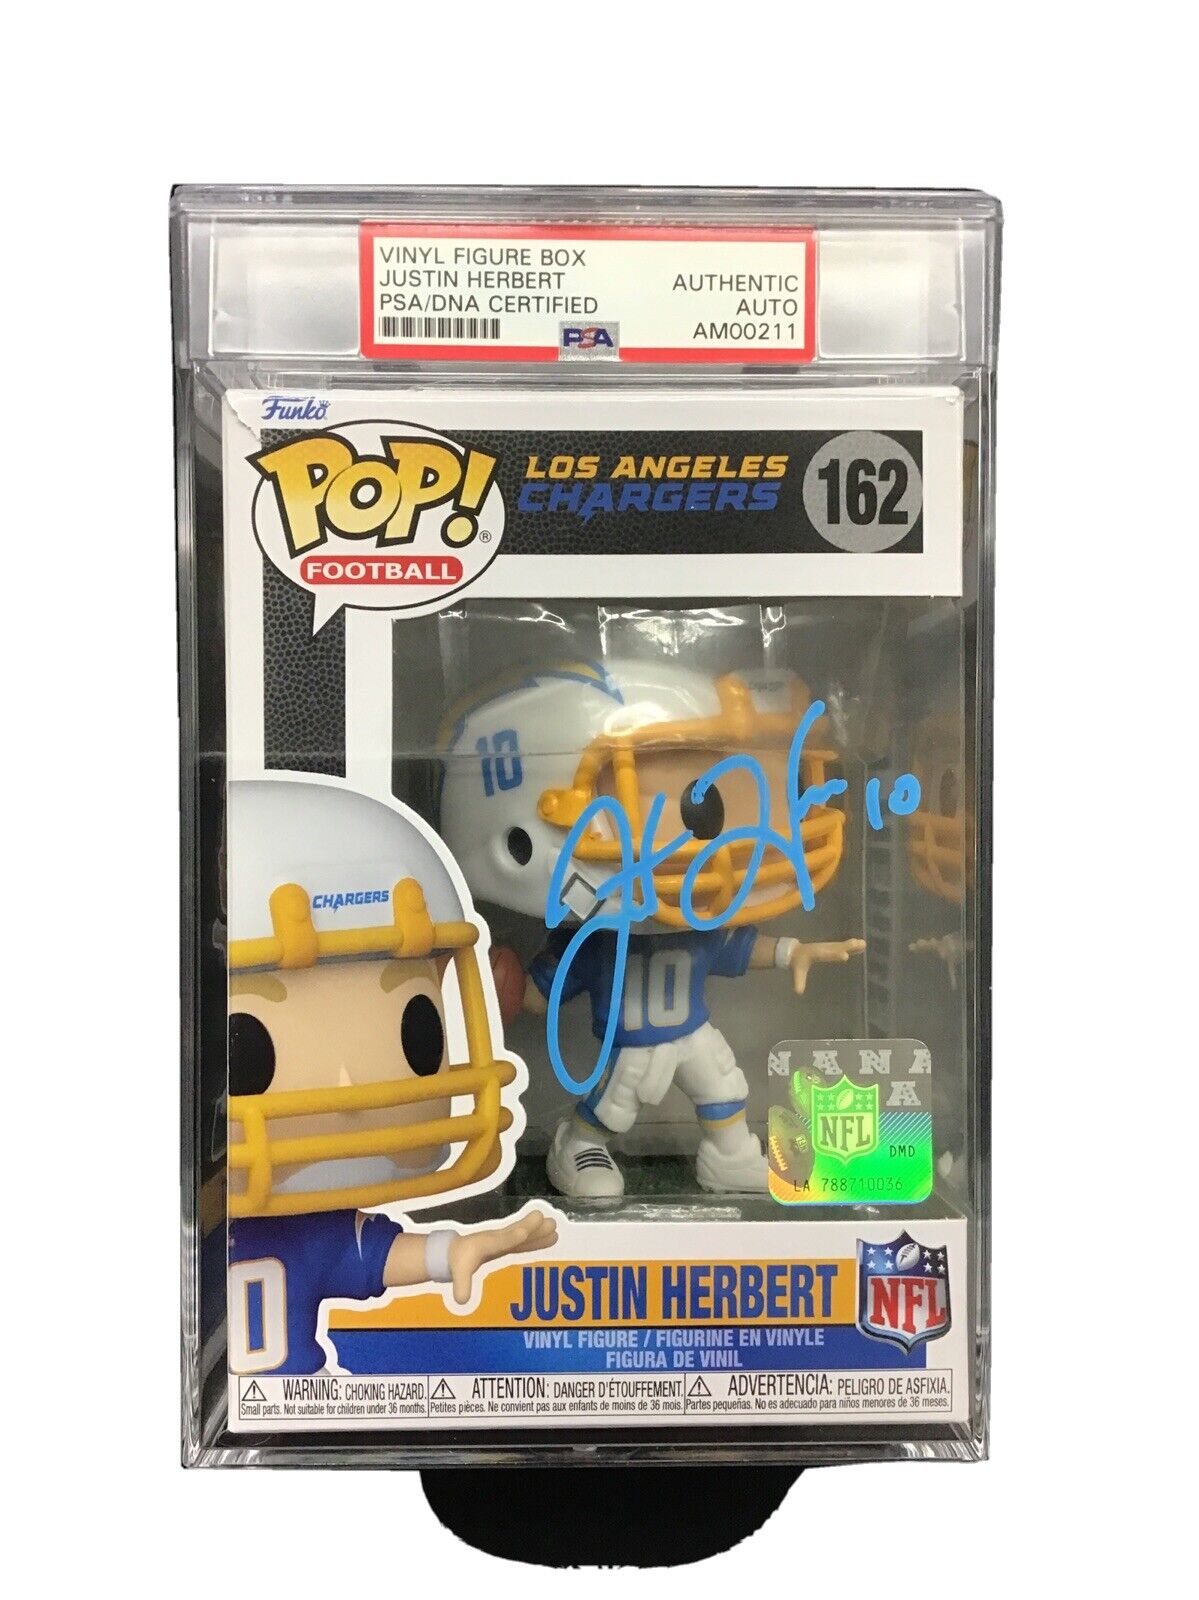 JUSTIN HERBERT SIGNED CHARGERS FUNKO POP #162 PSA SLABED AM00211